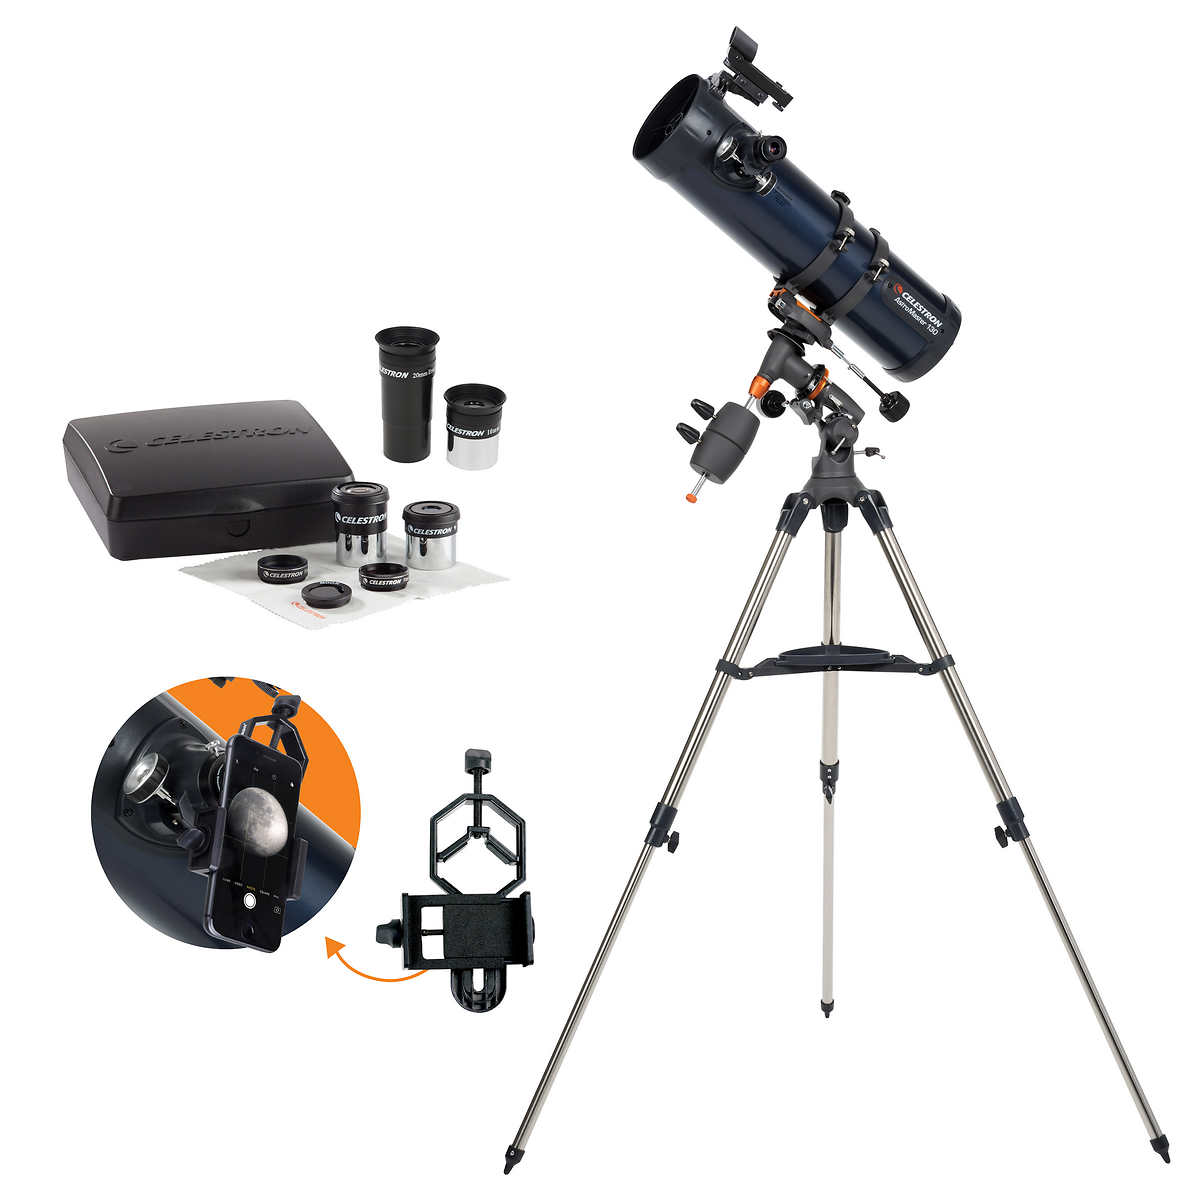 Celestron 31045 AstroMaster 130 EQ Reflector Telescope with Mars Observing Telescope Accessory Kit//Deluxe kits and Eyepiece Filter